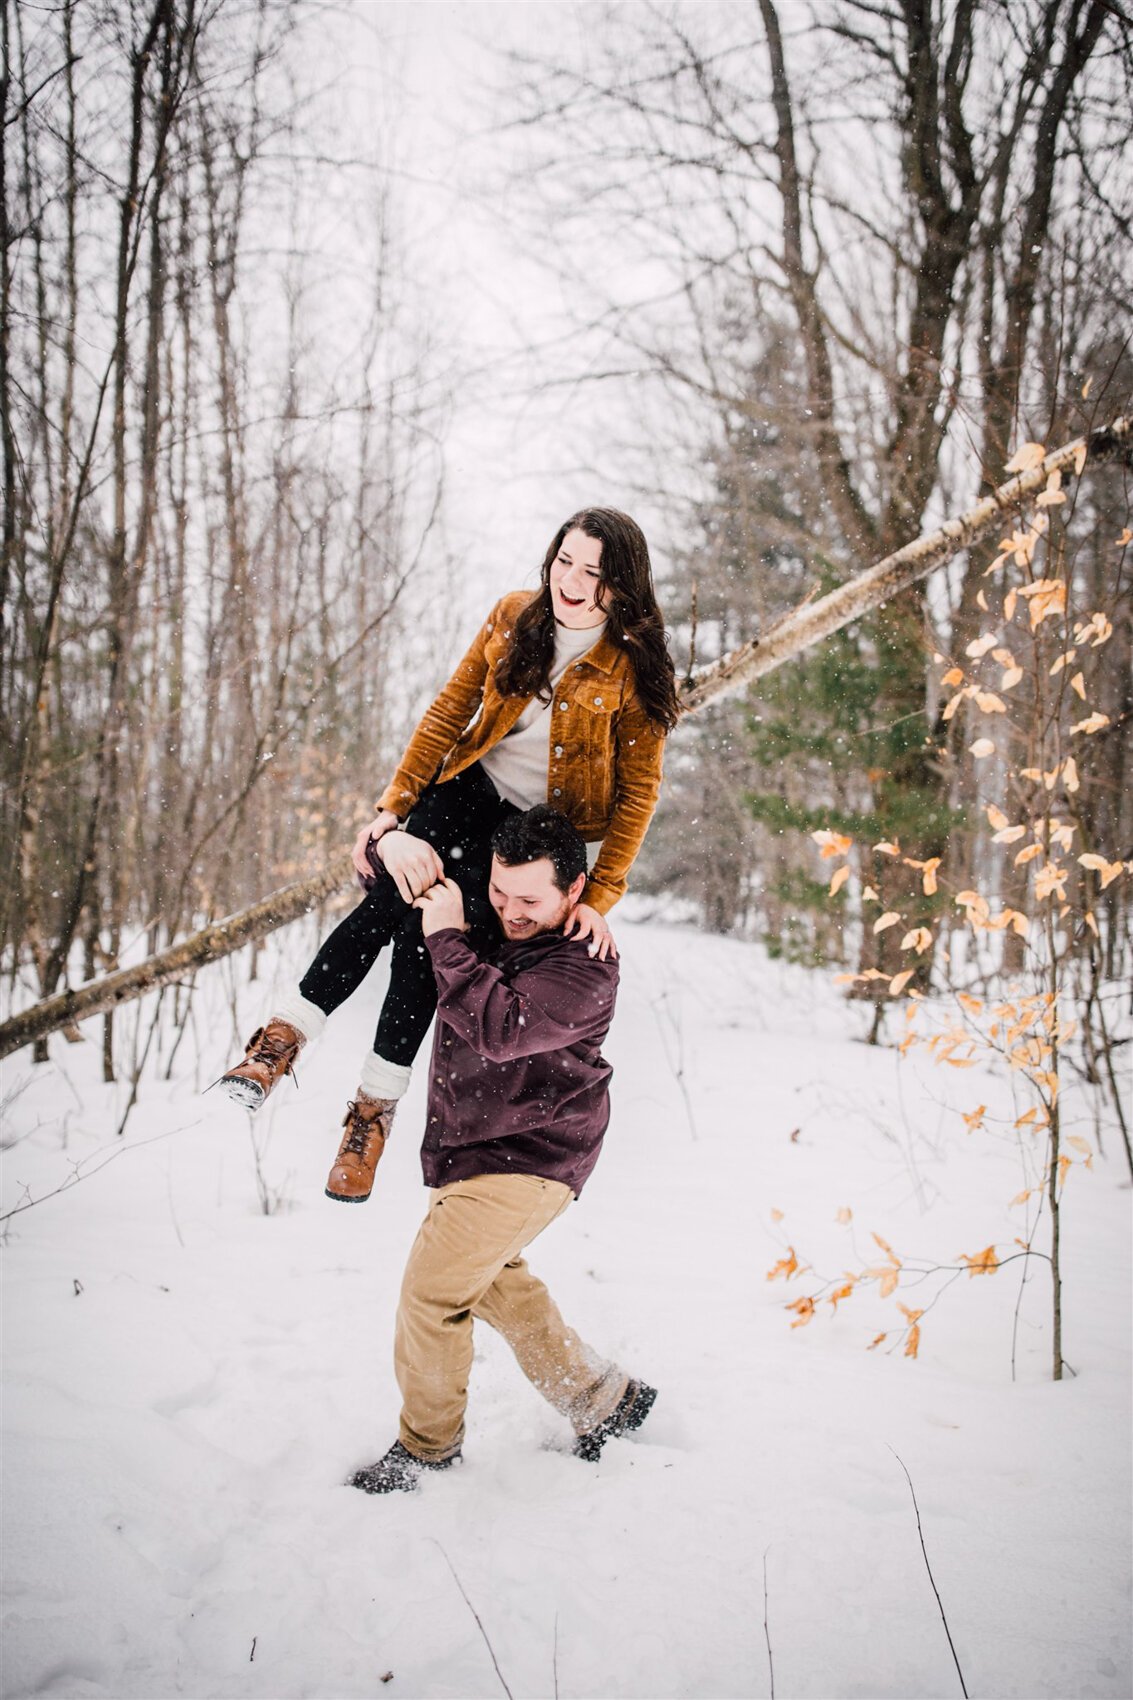 Carlie-and-Joe-Engagement-Pictures-Winter-2020-31.jpg